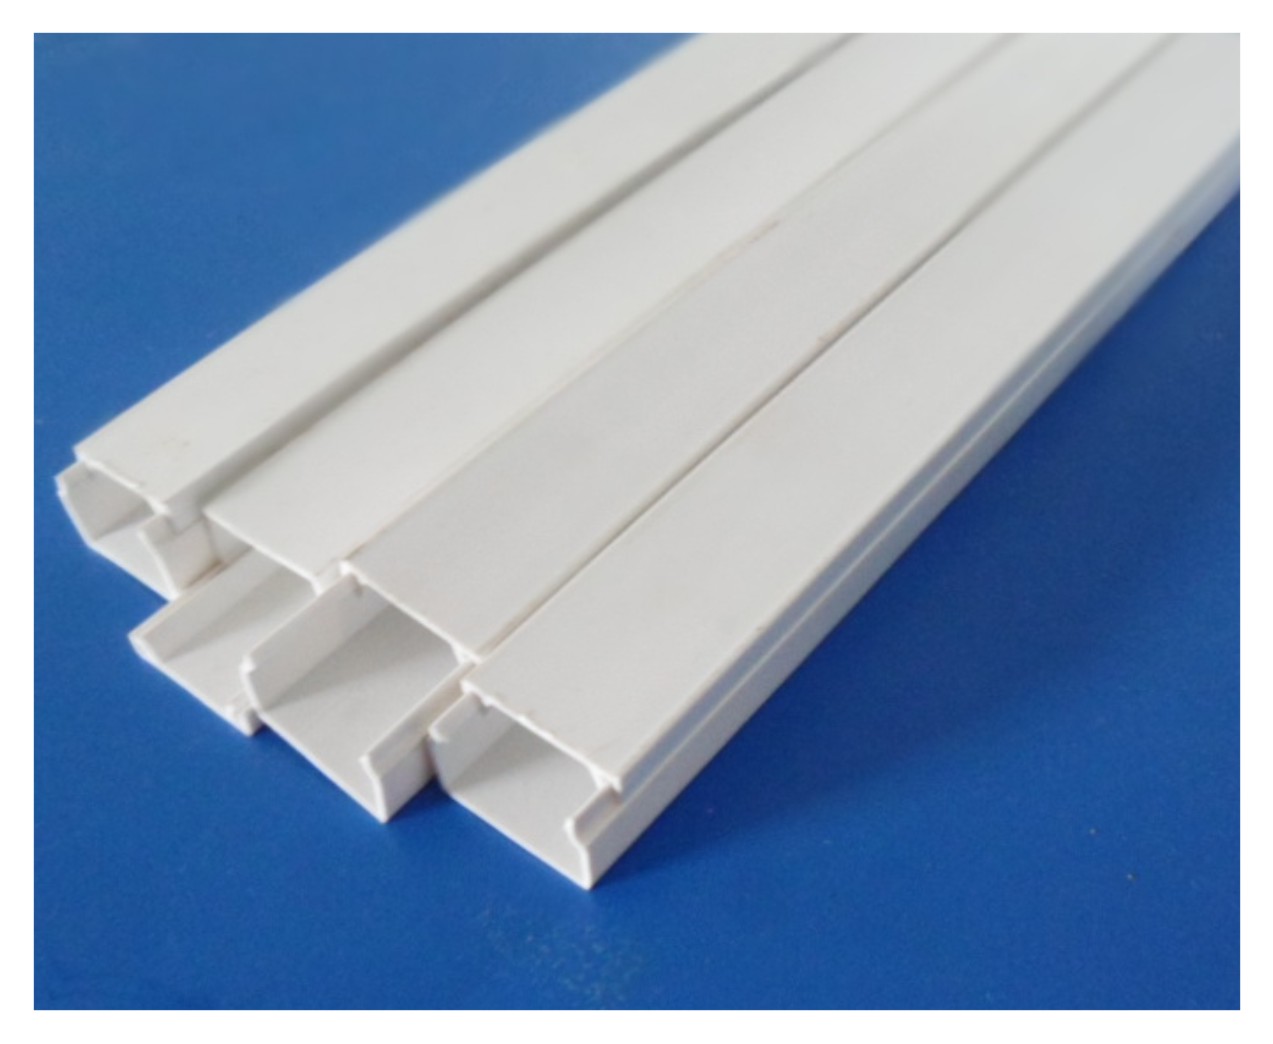 25mm PVC wall trunking. Standard quality and durable for electrical routing of cables.